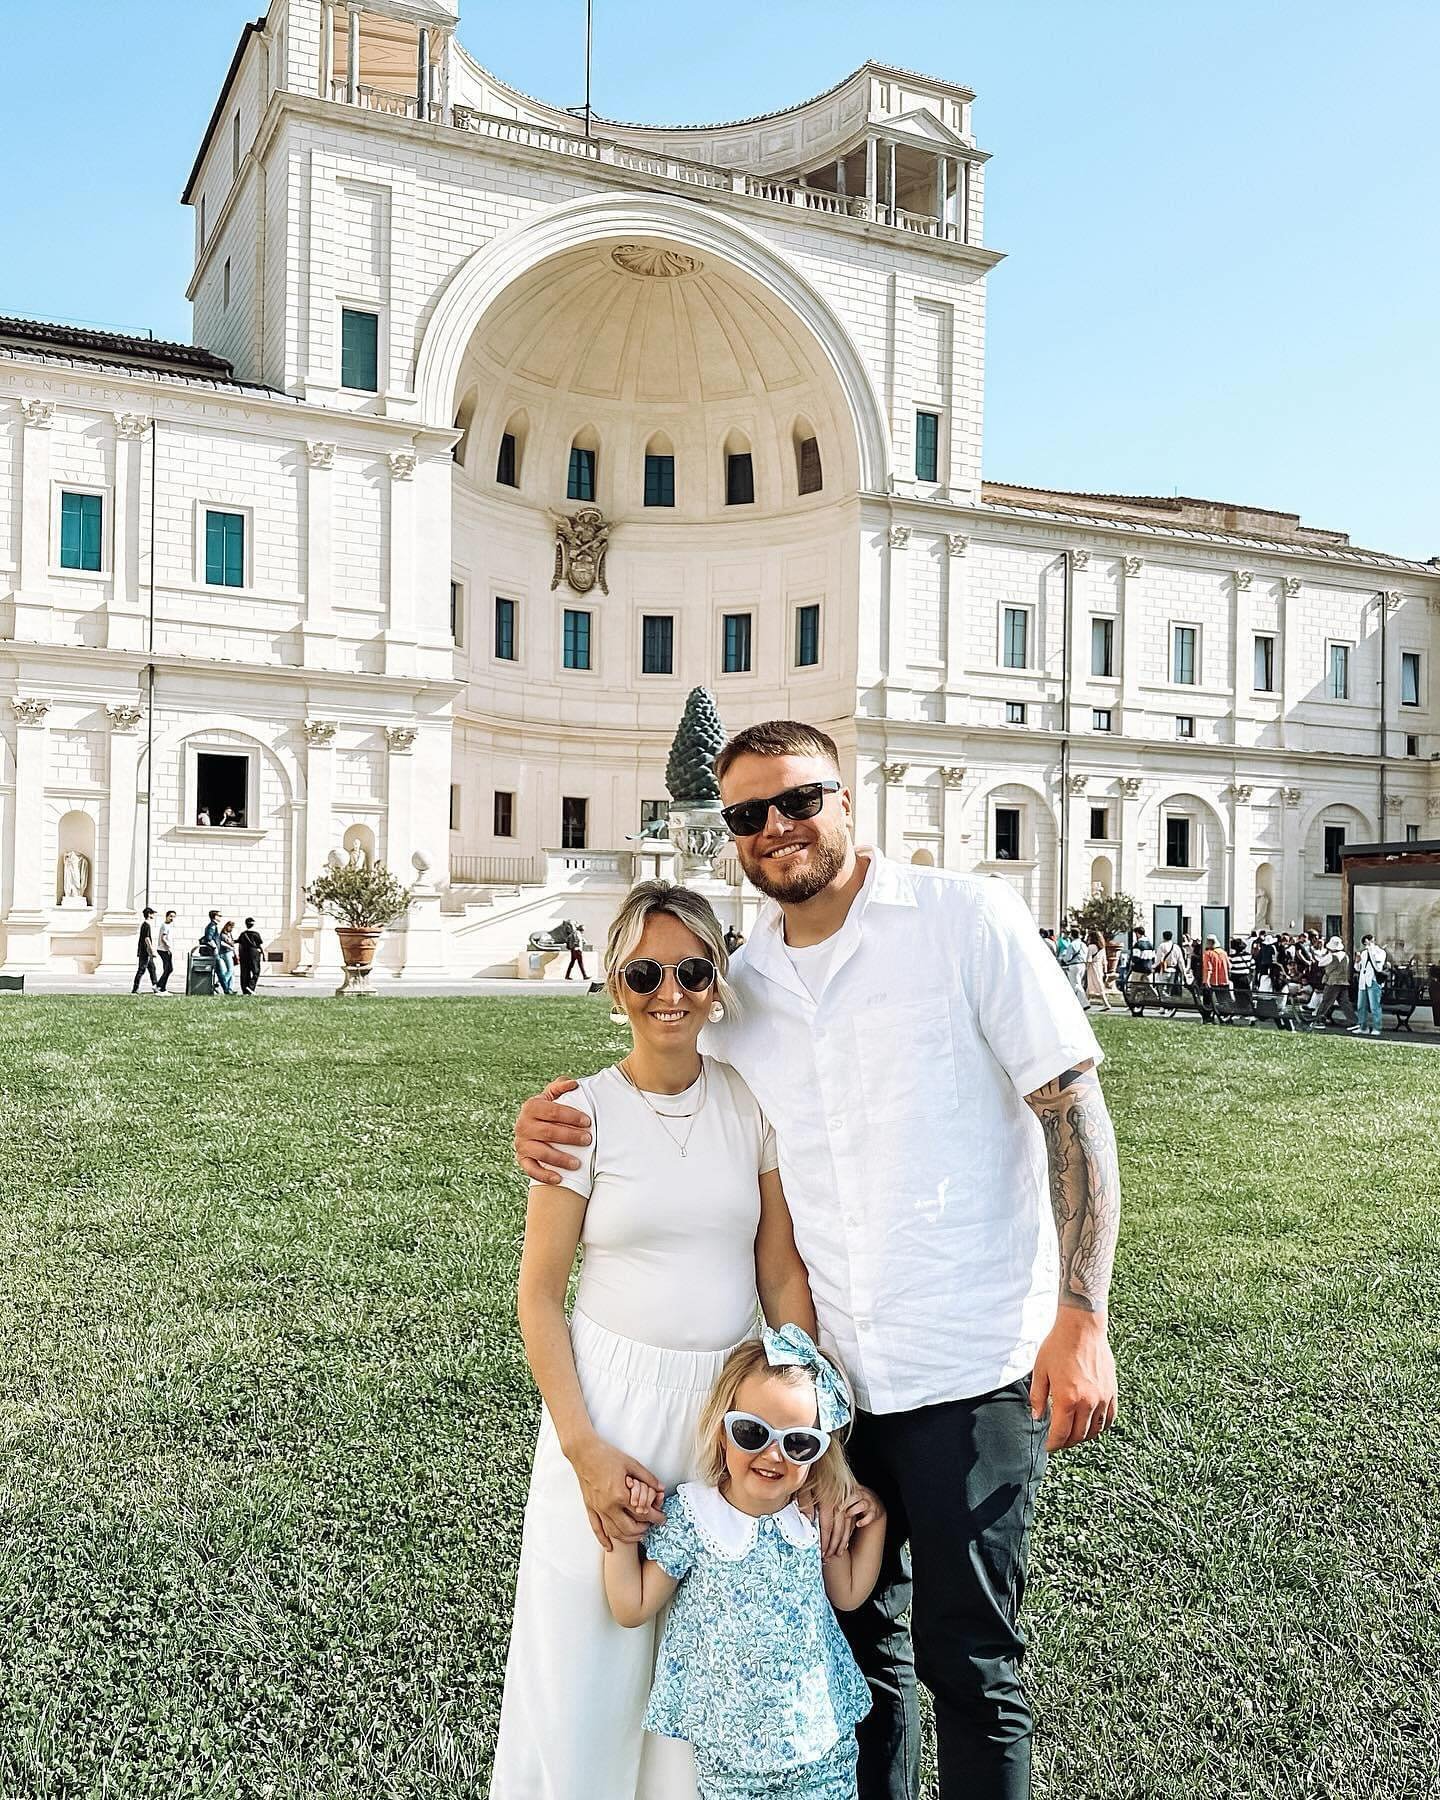 Happy clients everywhere this week! 

📸Hannah and her family are enjoying Italy! Love this photo!

🌷Another couple are sailing on a river cruise to see all beautiful tulips in Netherlands and Belgium. 

⛳️A third couple is heading to Ireland, Engla